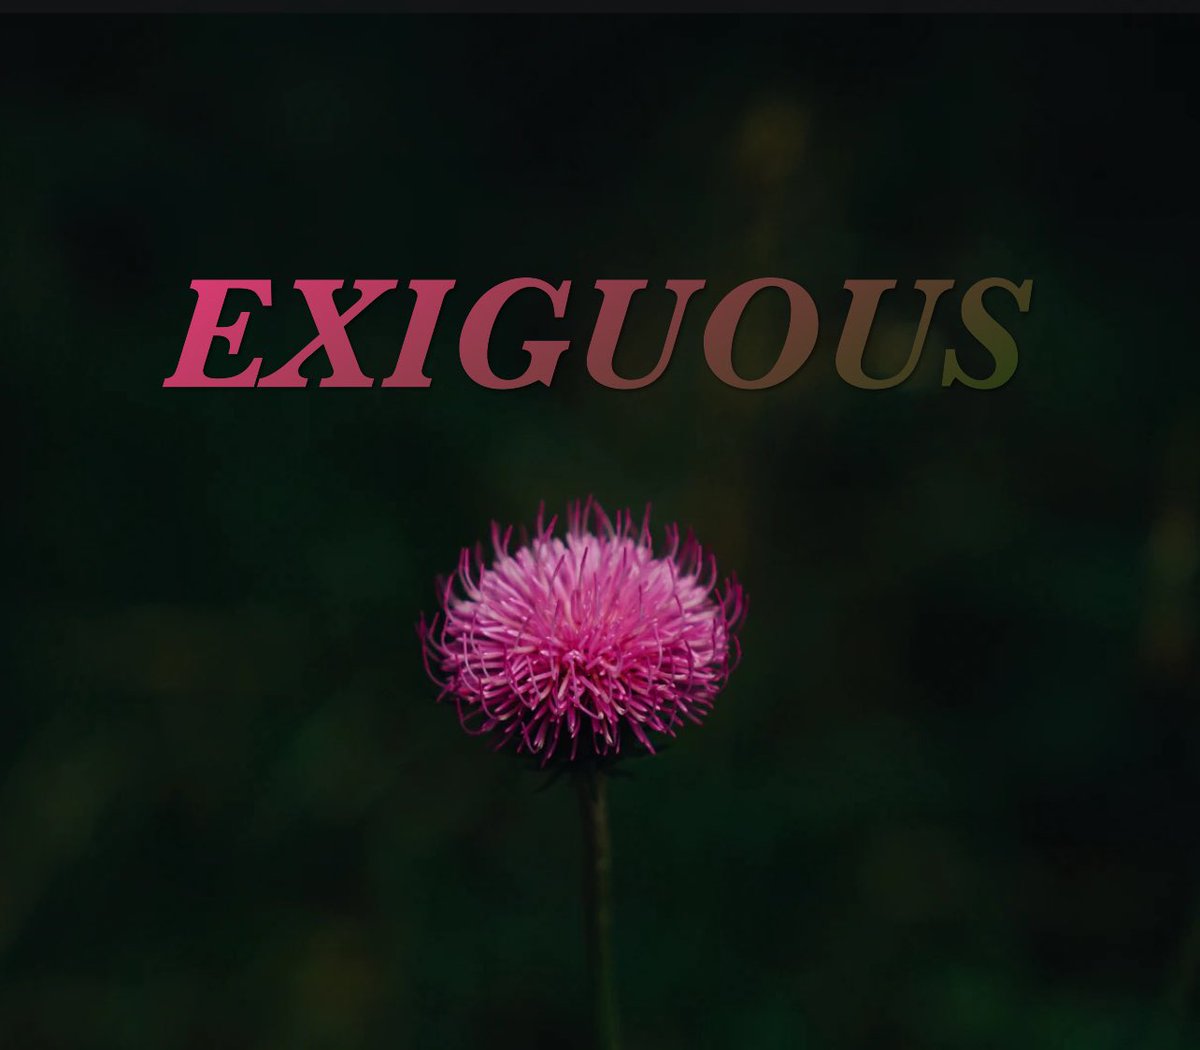 #SymphAndJules word of the day: Exiguous

Don't forget to @ us in your posts, and we'll re-tweet! 💛📷

#WritingPrompts